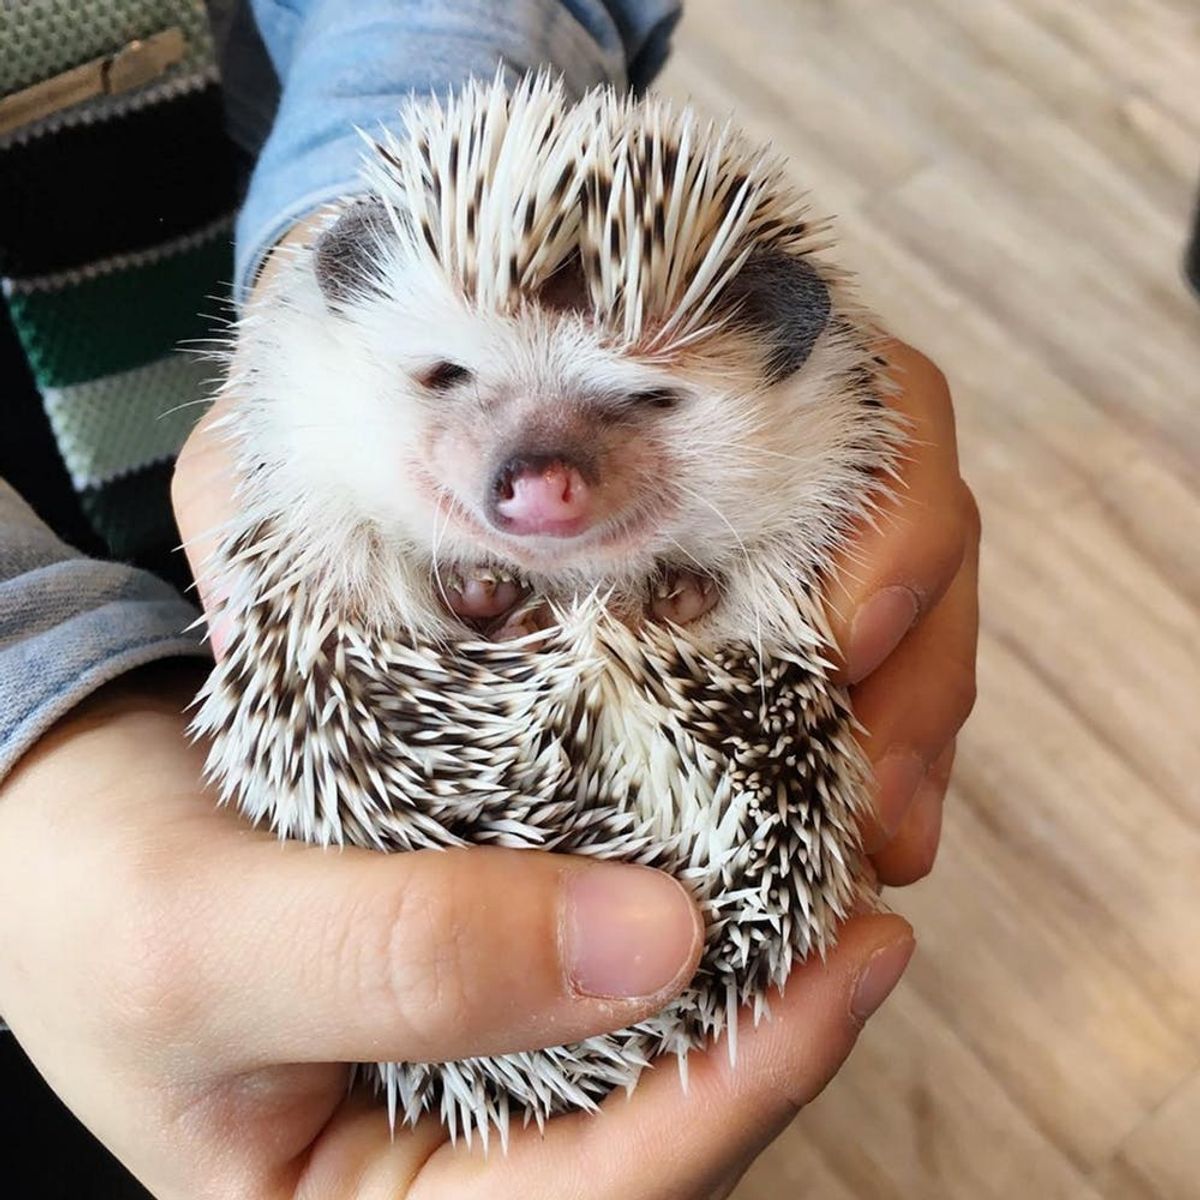 Step Aside Cat Cafes: Hedgehog Cafes Are the New Thing